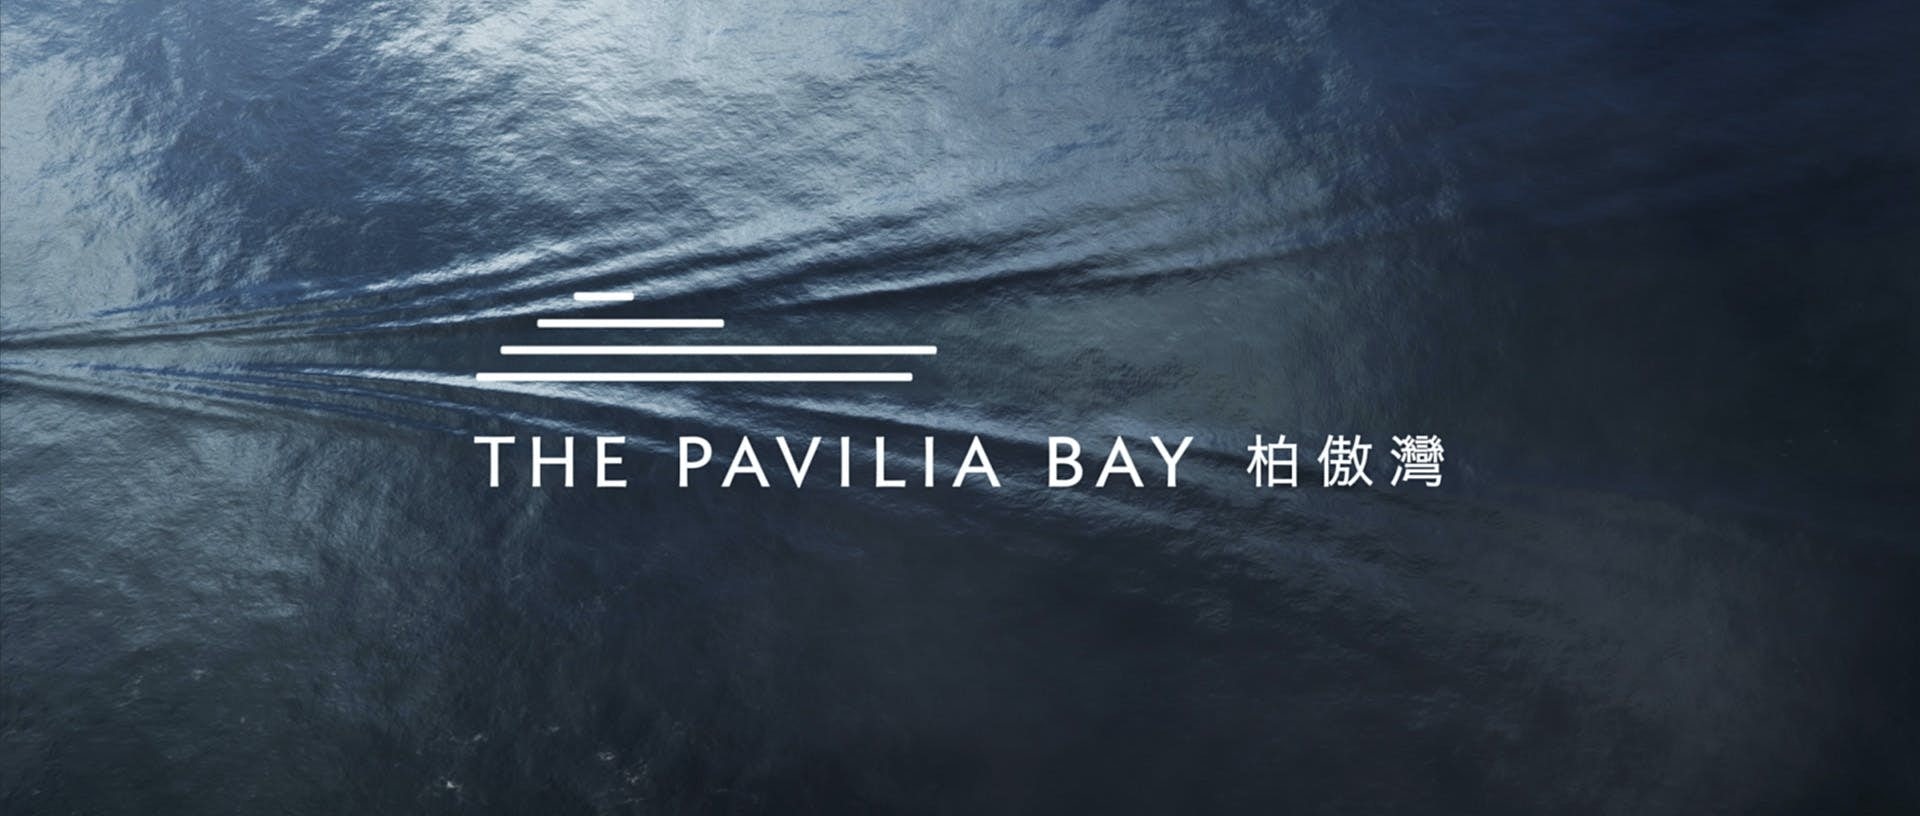 Top view of the ocean with water ripples. The pavilia bay logo visible on top.